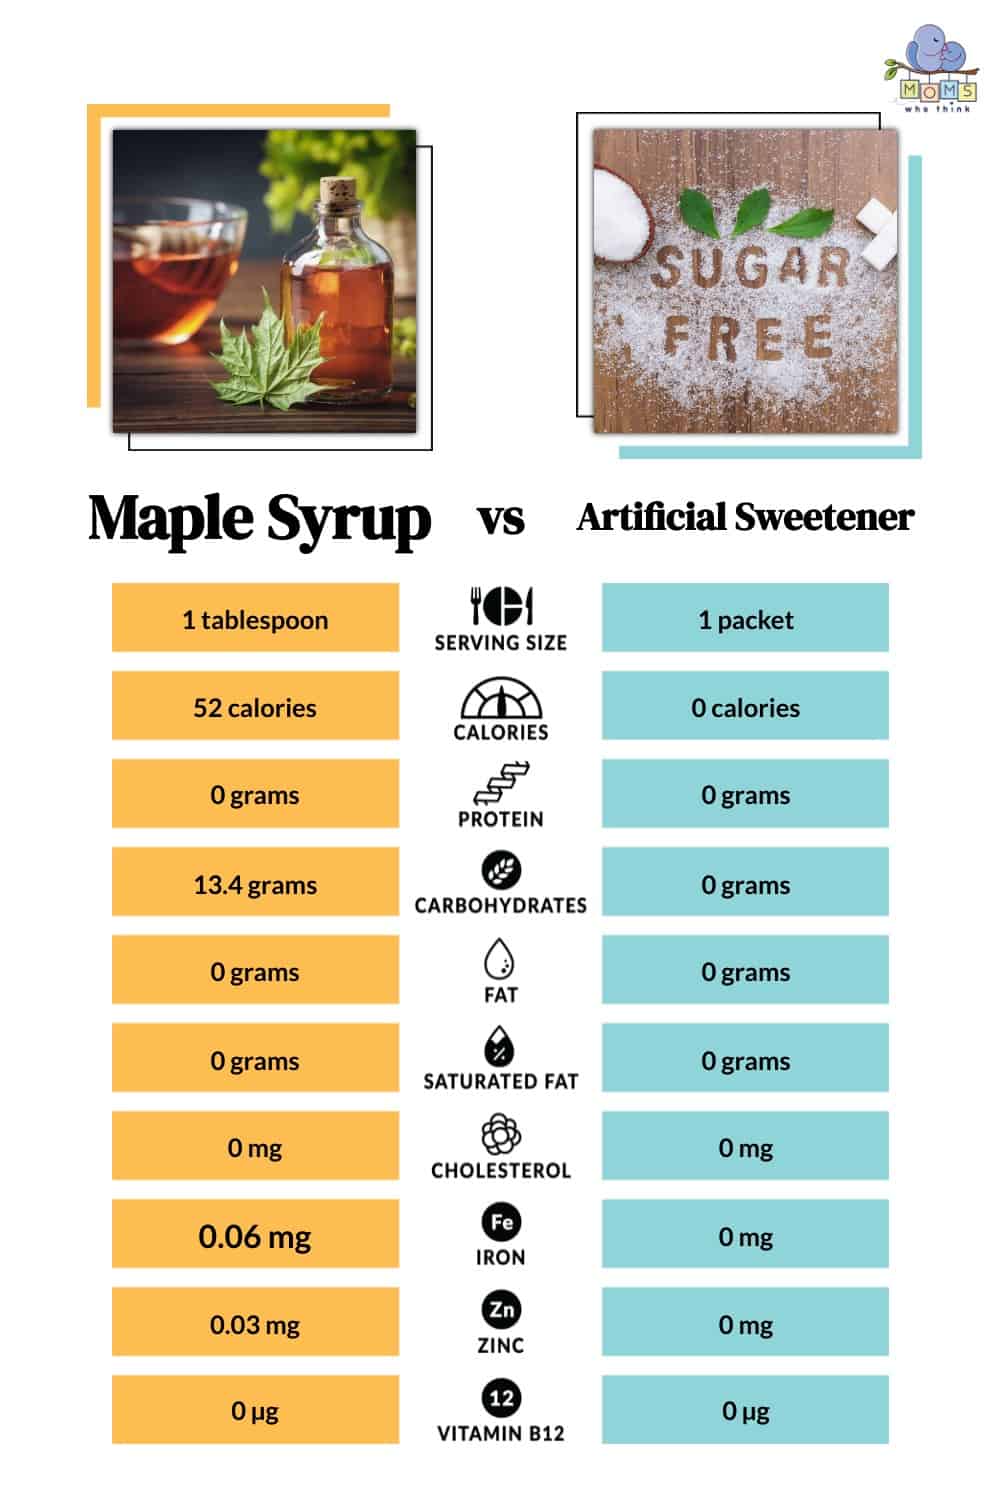 Maple Syrup vs Artificial Sweetener Nutritional Facts